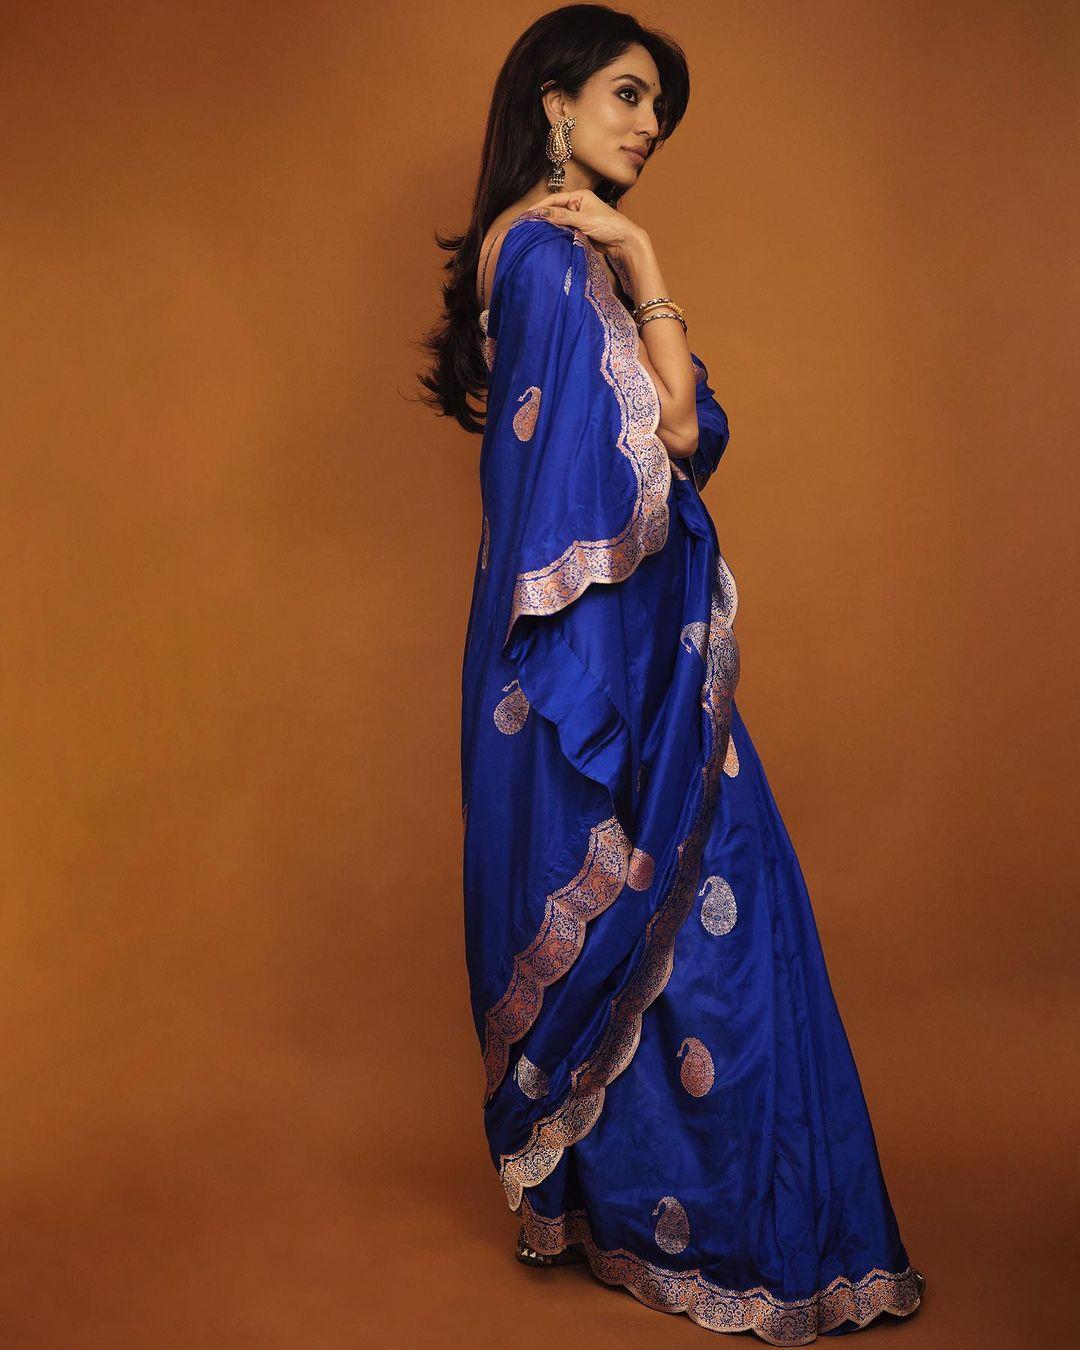 For the second day of Chaitra Navratri, you might want to opt for a stunning royal blue ensemble similar to the one worn by Sobhita Dhulipala. Draped in a stunning hue of royal blue, the actress wore a handwoven silk sari, meticulously crafted using the Kadhwa handloom weaving technique originating from Banaras. 